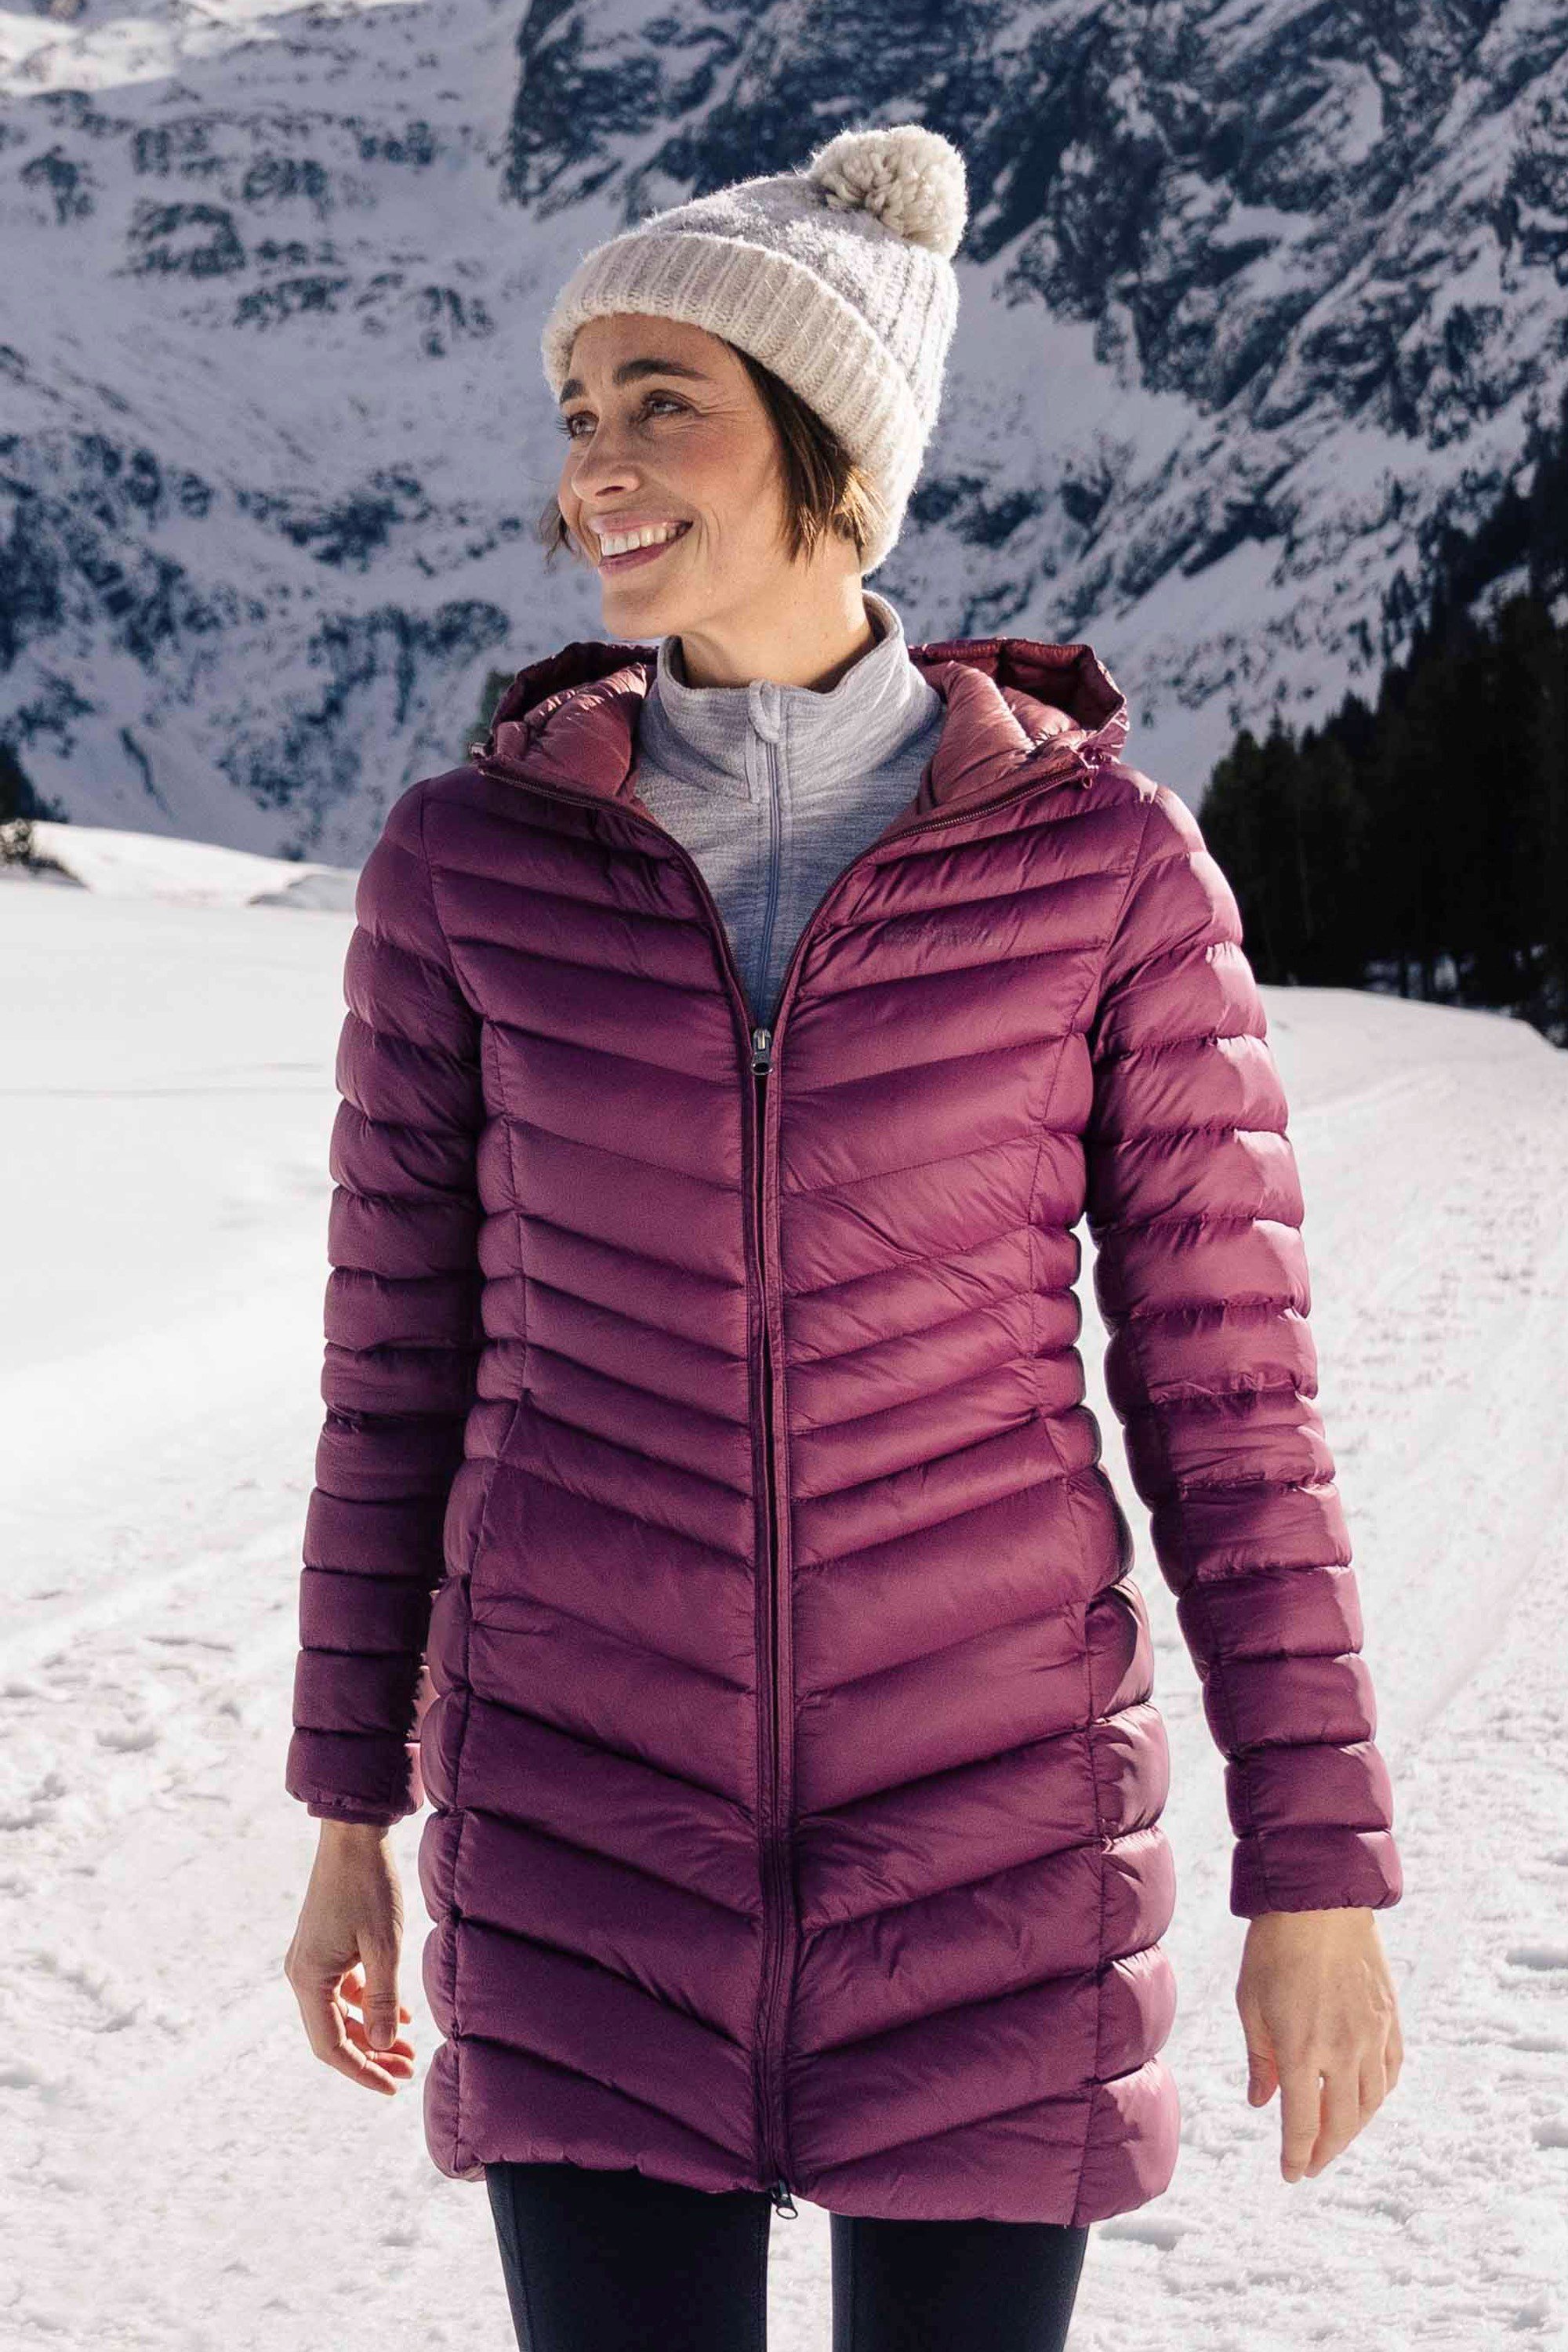 The 5 Best Insulated Jackets for Women | GearLab